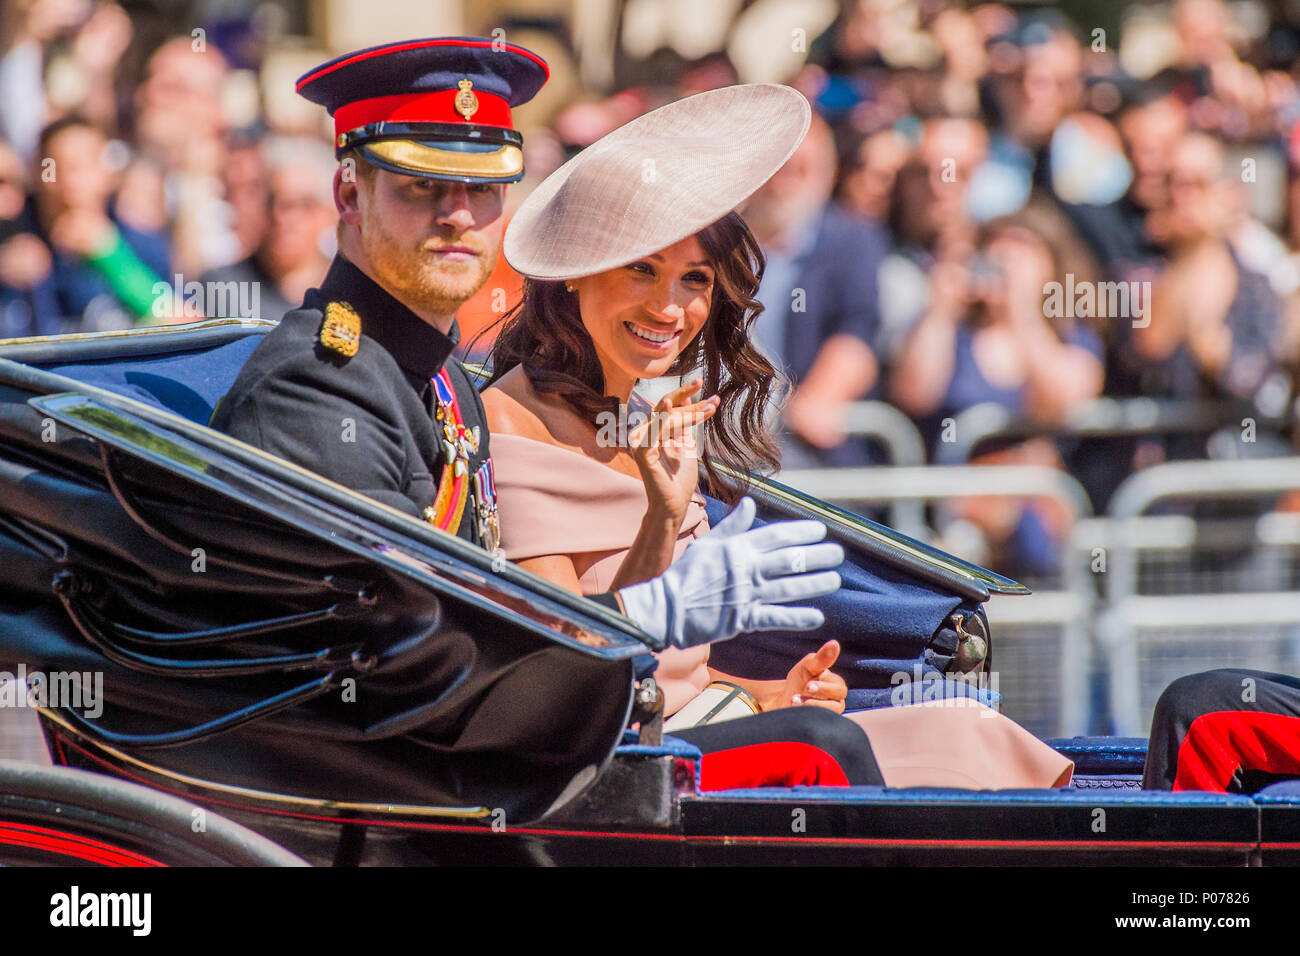 London, UK, 9 June 2018. Prince Harry and Meghan, The Duke and Duchess of Sussex arrive - The Queen’s Birthday Parade, more popularly known as Trooping the Colour. The Coldstream Guards Troop Their Colour., Credit: Guy Bell/Alamy Live News Stock Photo